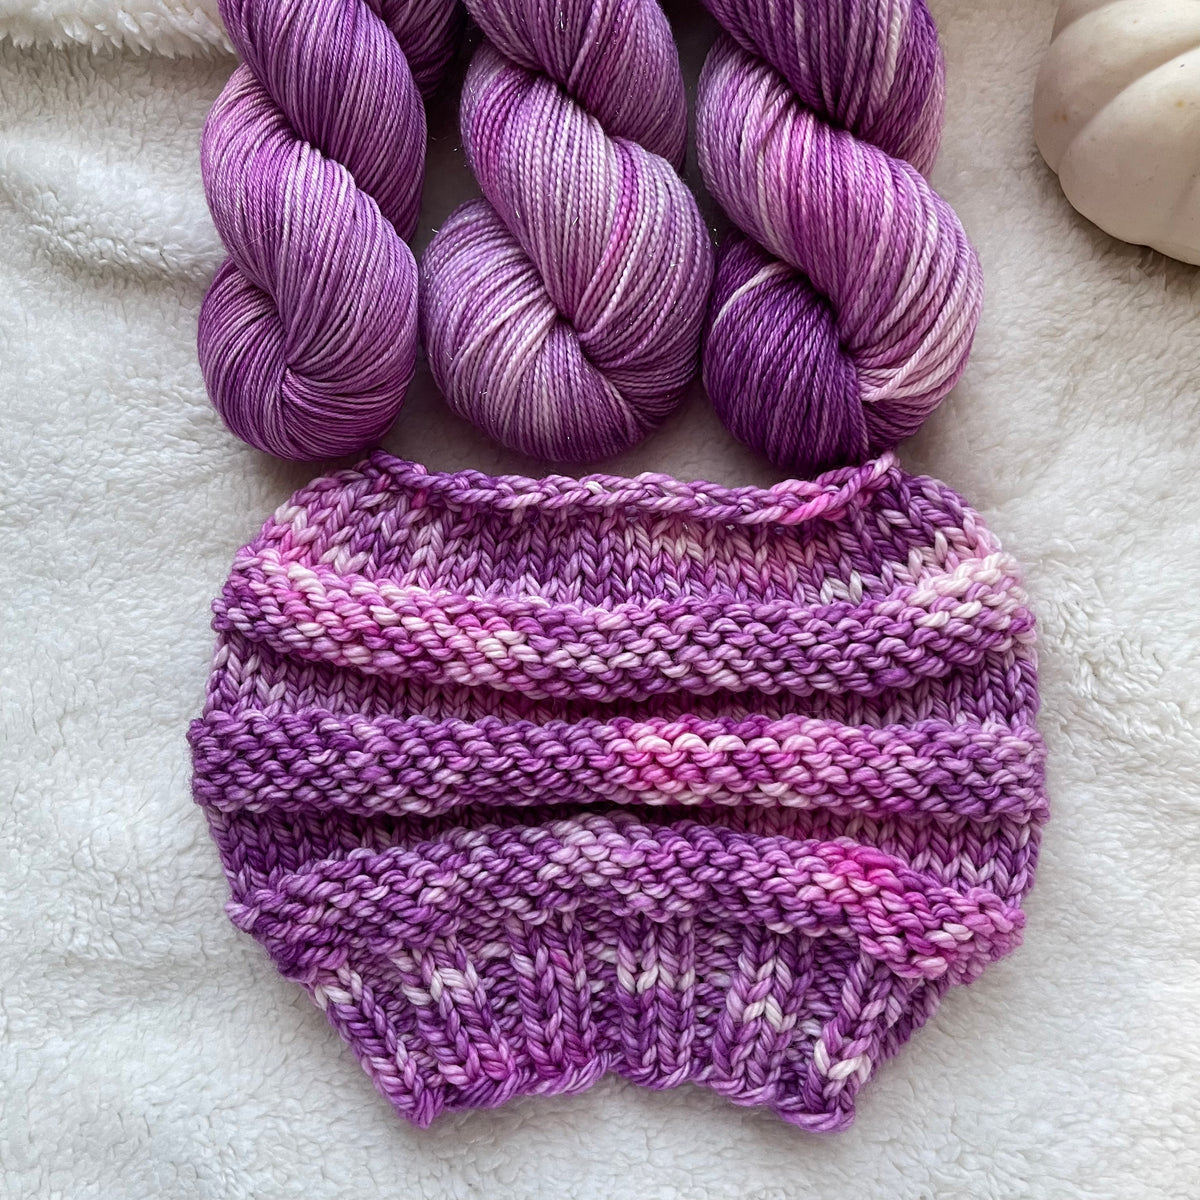 BEAUTYBERRY  -Dyed to Order - Hand Dyed Yarn Skein